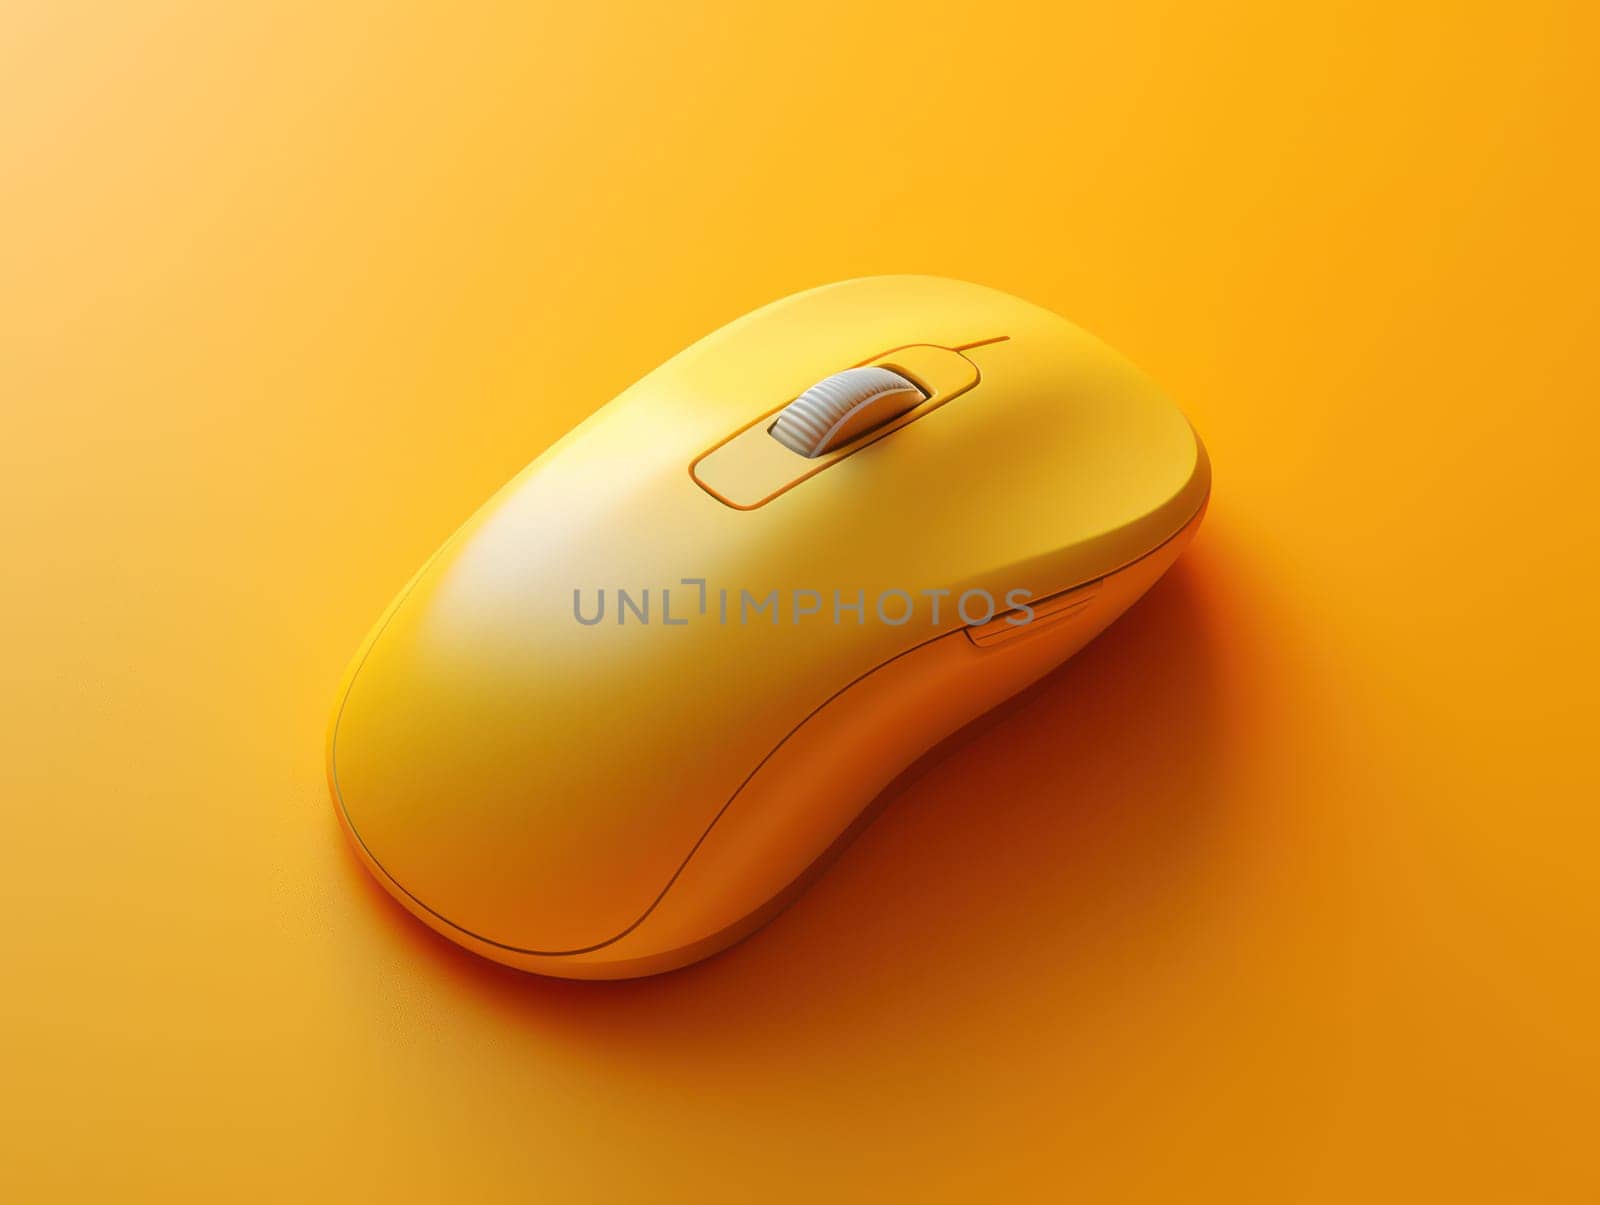 Modern White Optical Mouse with Wireless Connectivity on Black Background